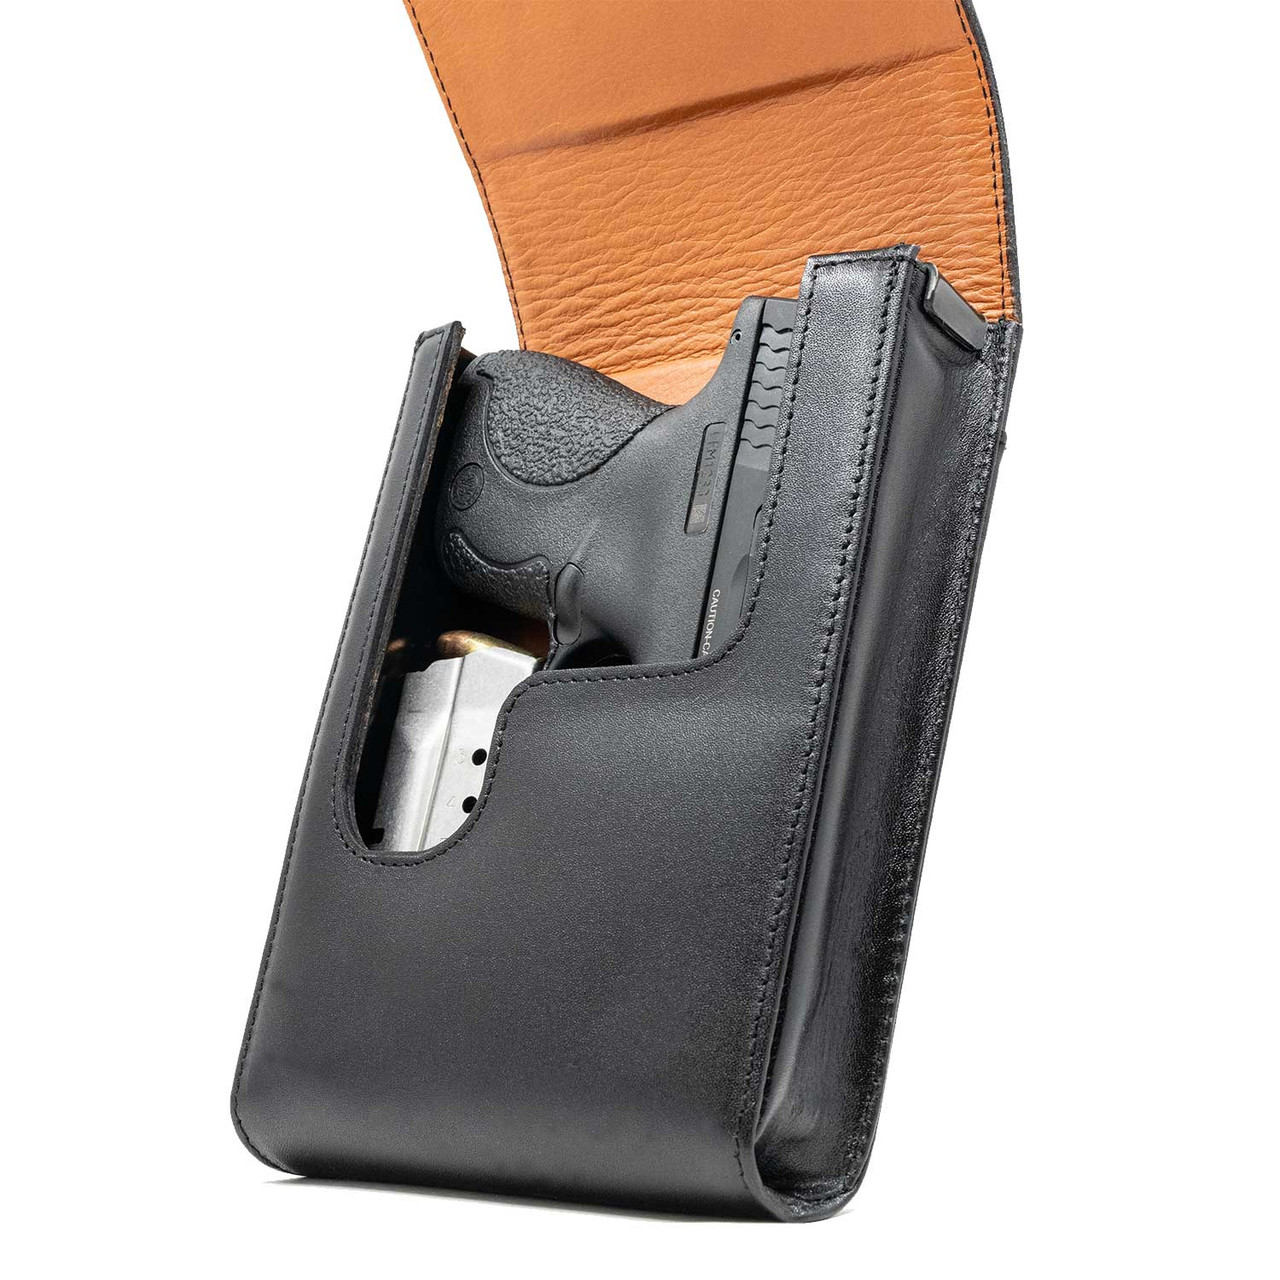 The Springfield 911 (.380) Xtra Mag Black Leather Holster